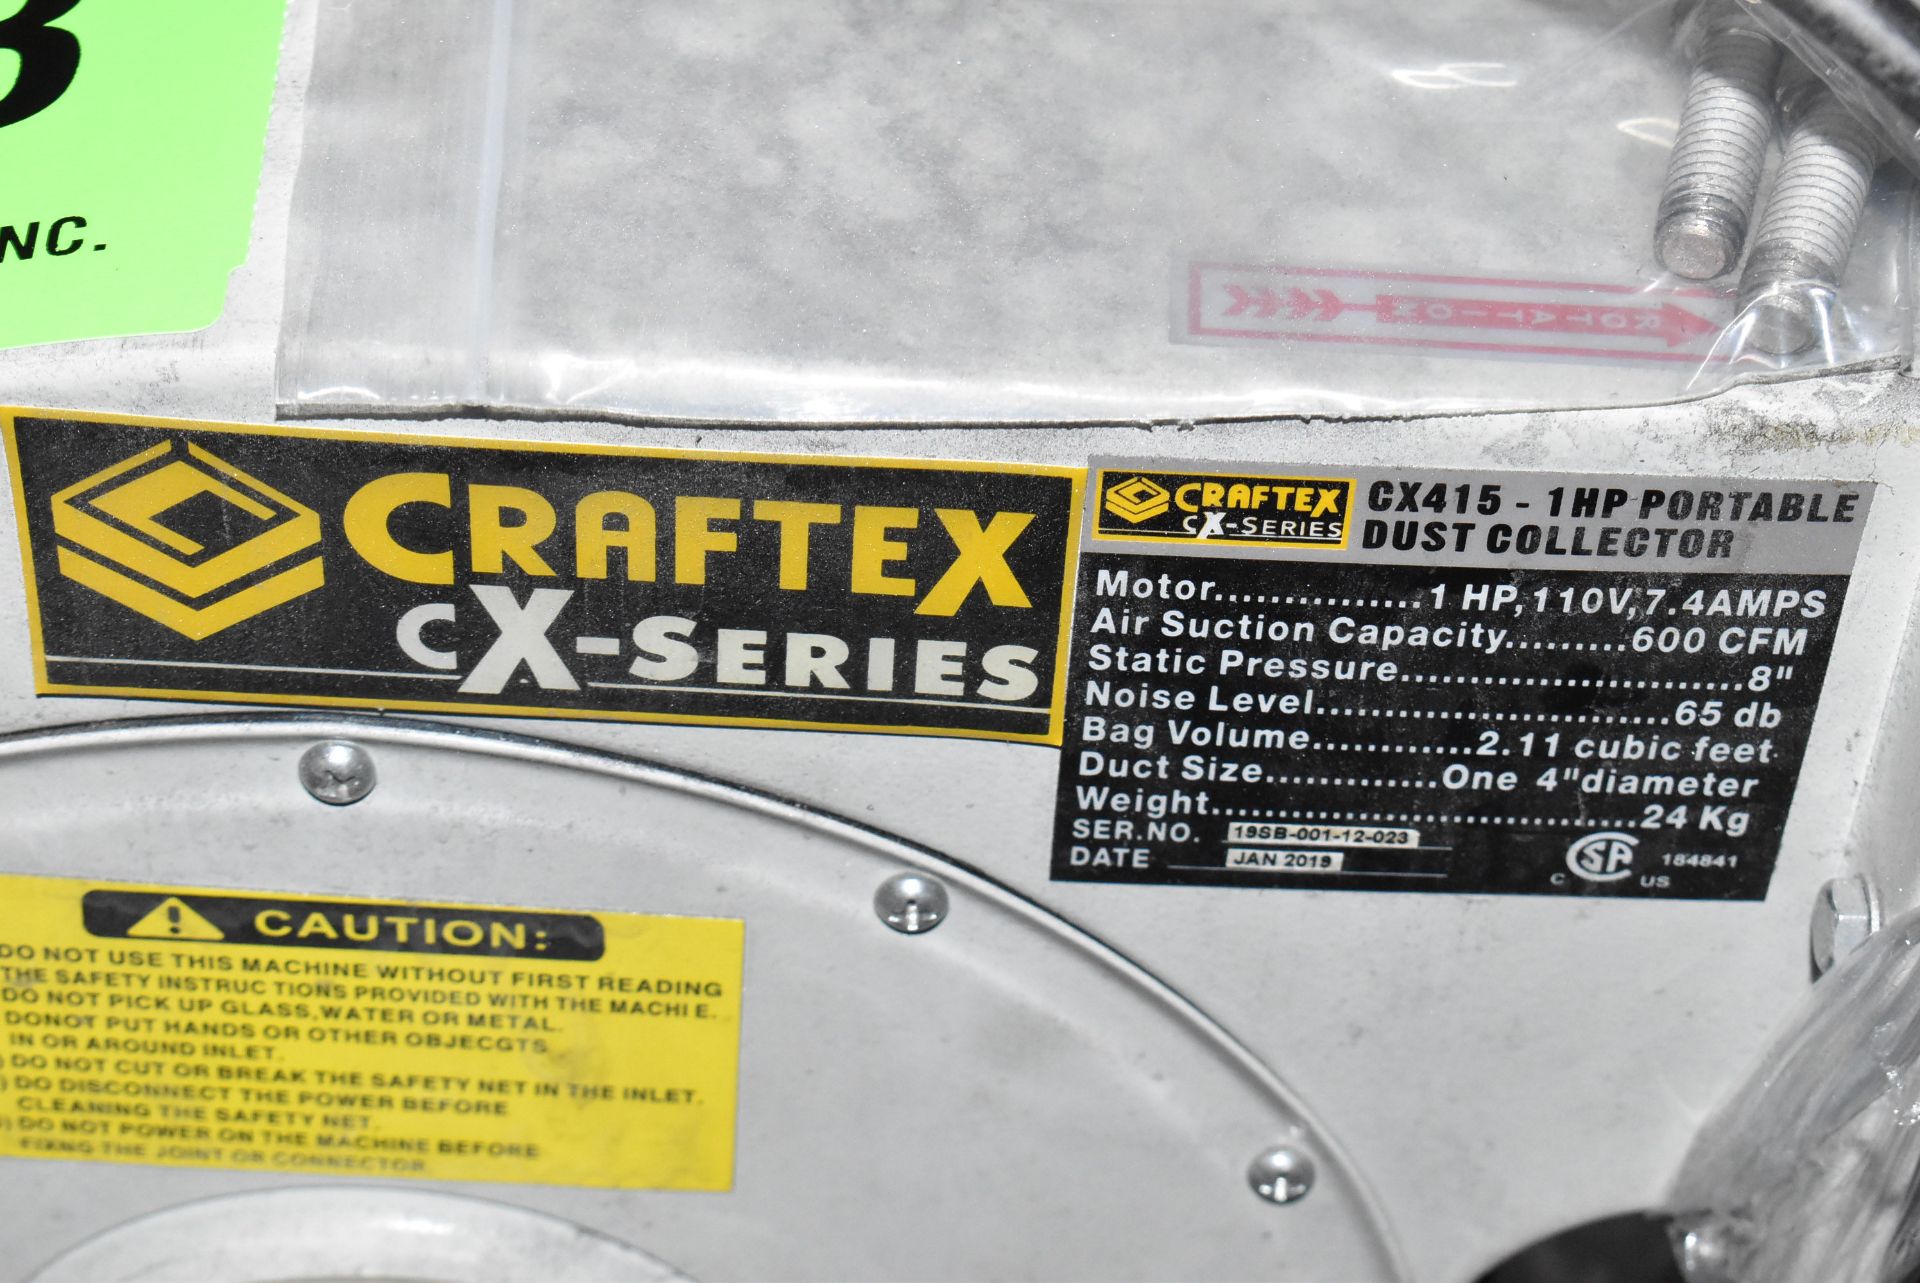 CRAFTEX CX-SERIES CX415 1 HP PORTABLE DUST COLLECTOR WITH 600 CFM AIR SUCTION CAPACITY, S/N 19SB- - Image 2 of 2